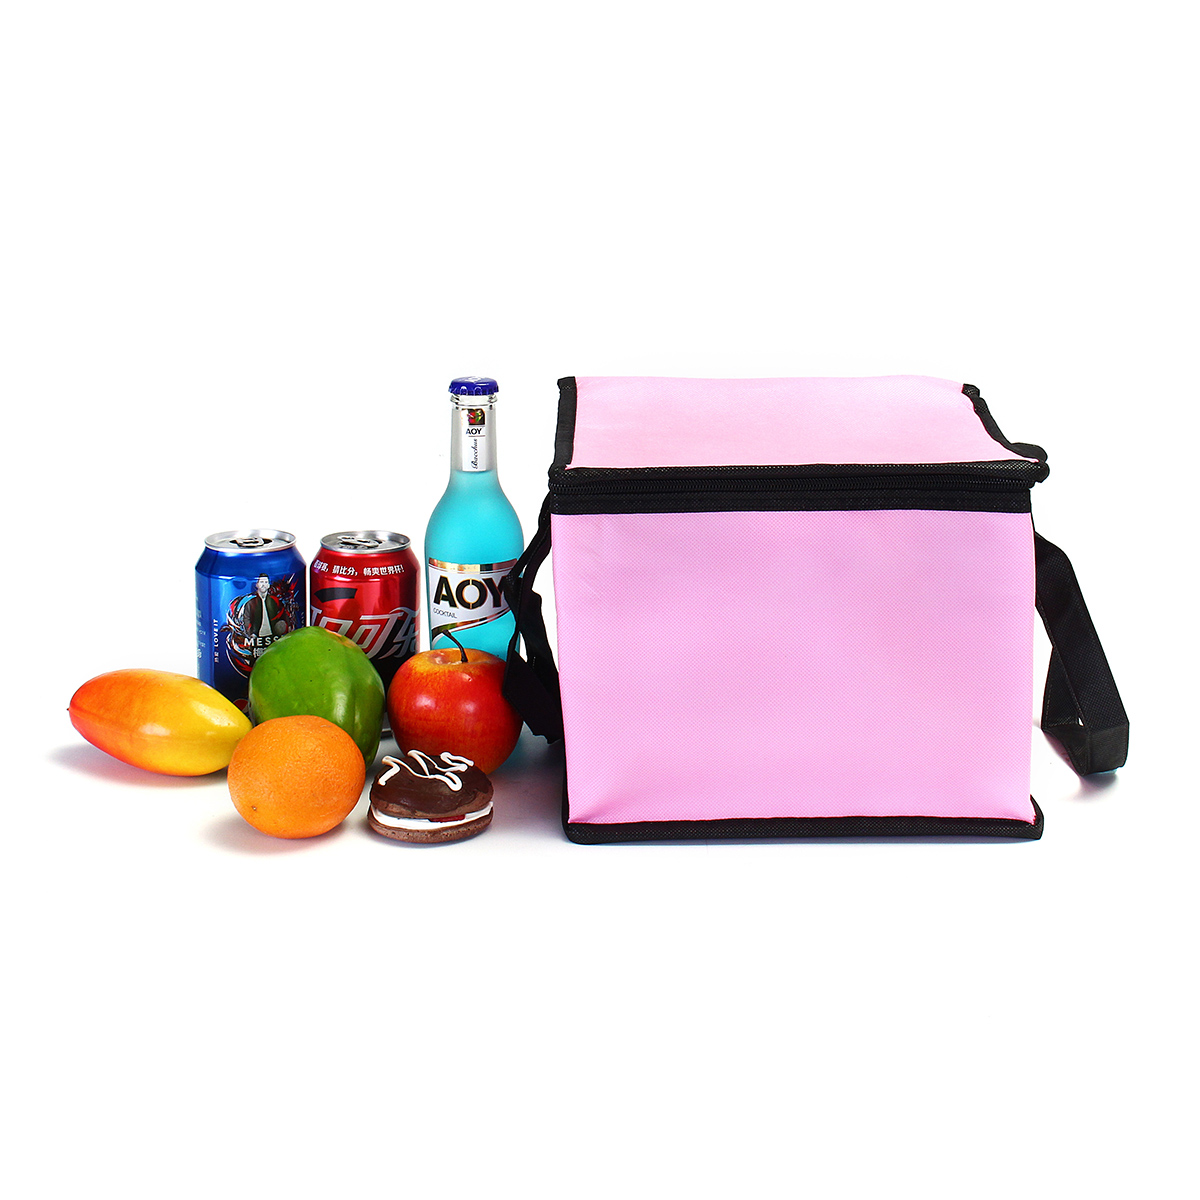 6-Inch-Non-woven-Fresh-keeping-Tote-Bag-with-Zipper-Cake-Picnic-Lunch-Bag-Reusable-Grocery-Bag-1353006-1